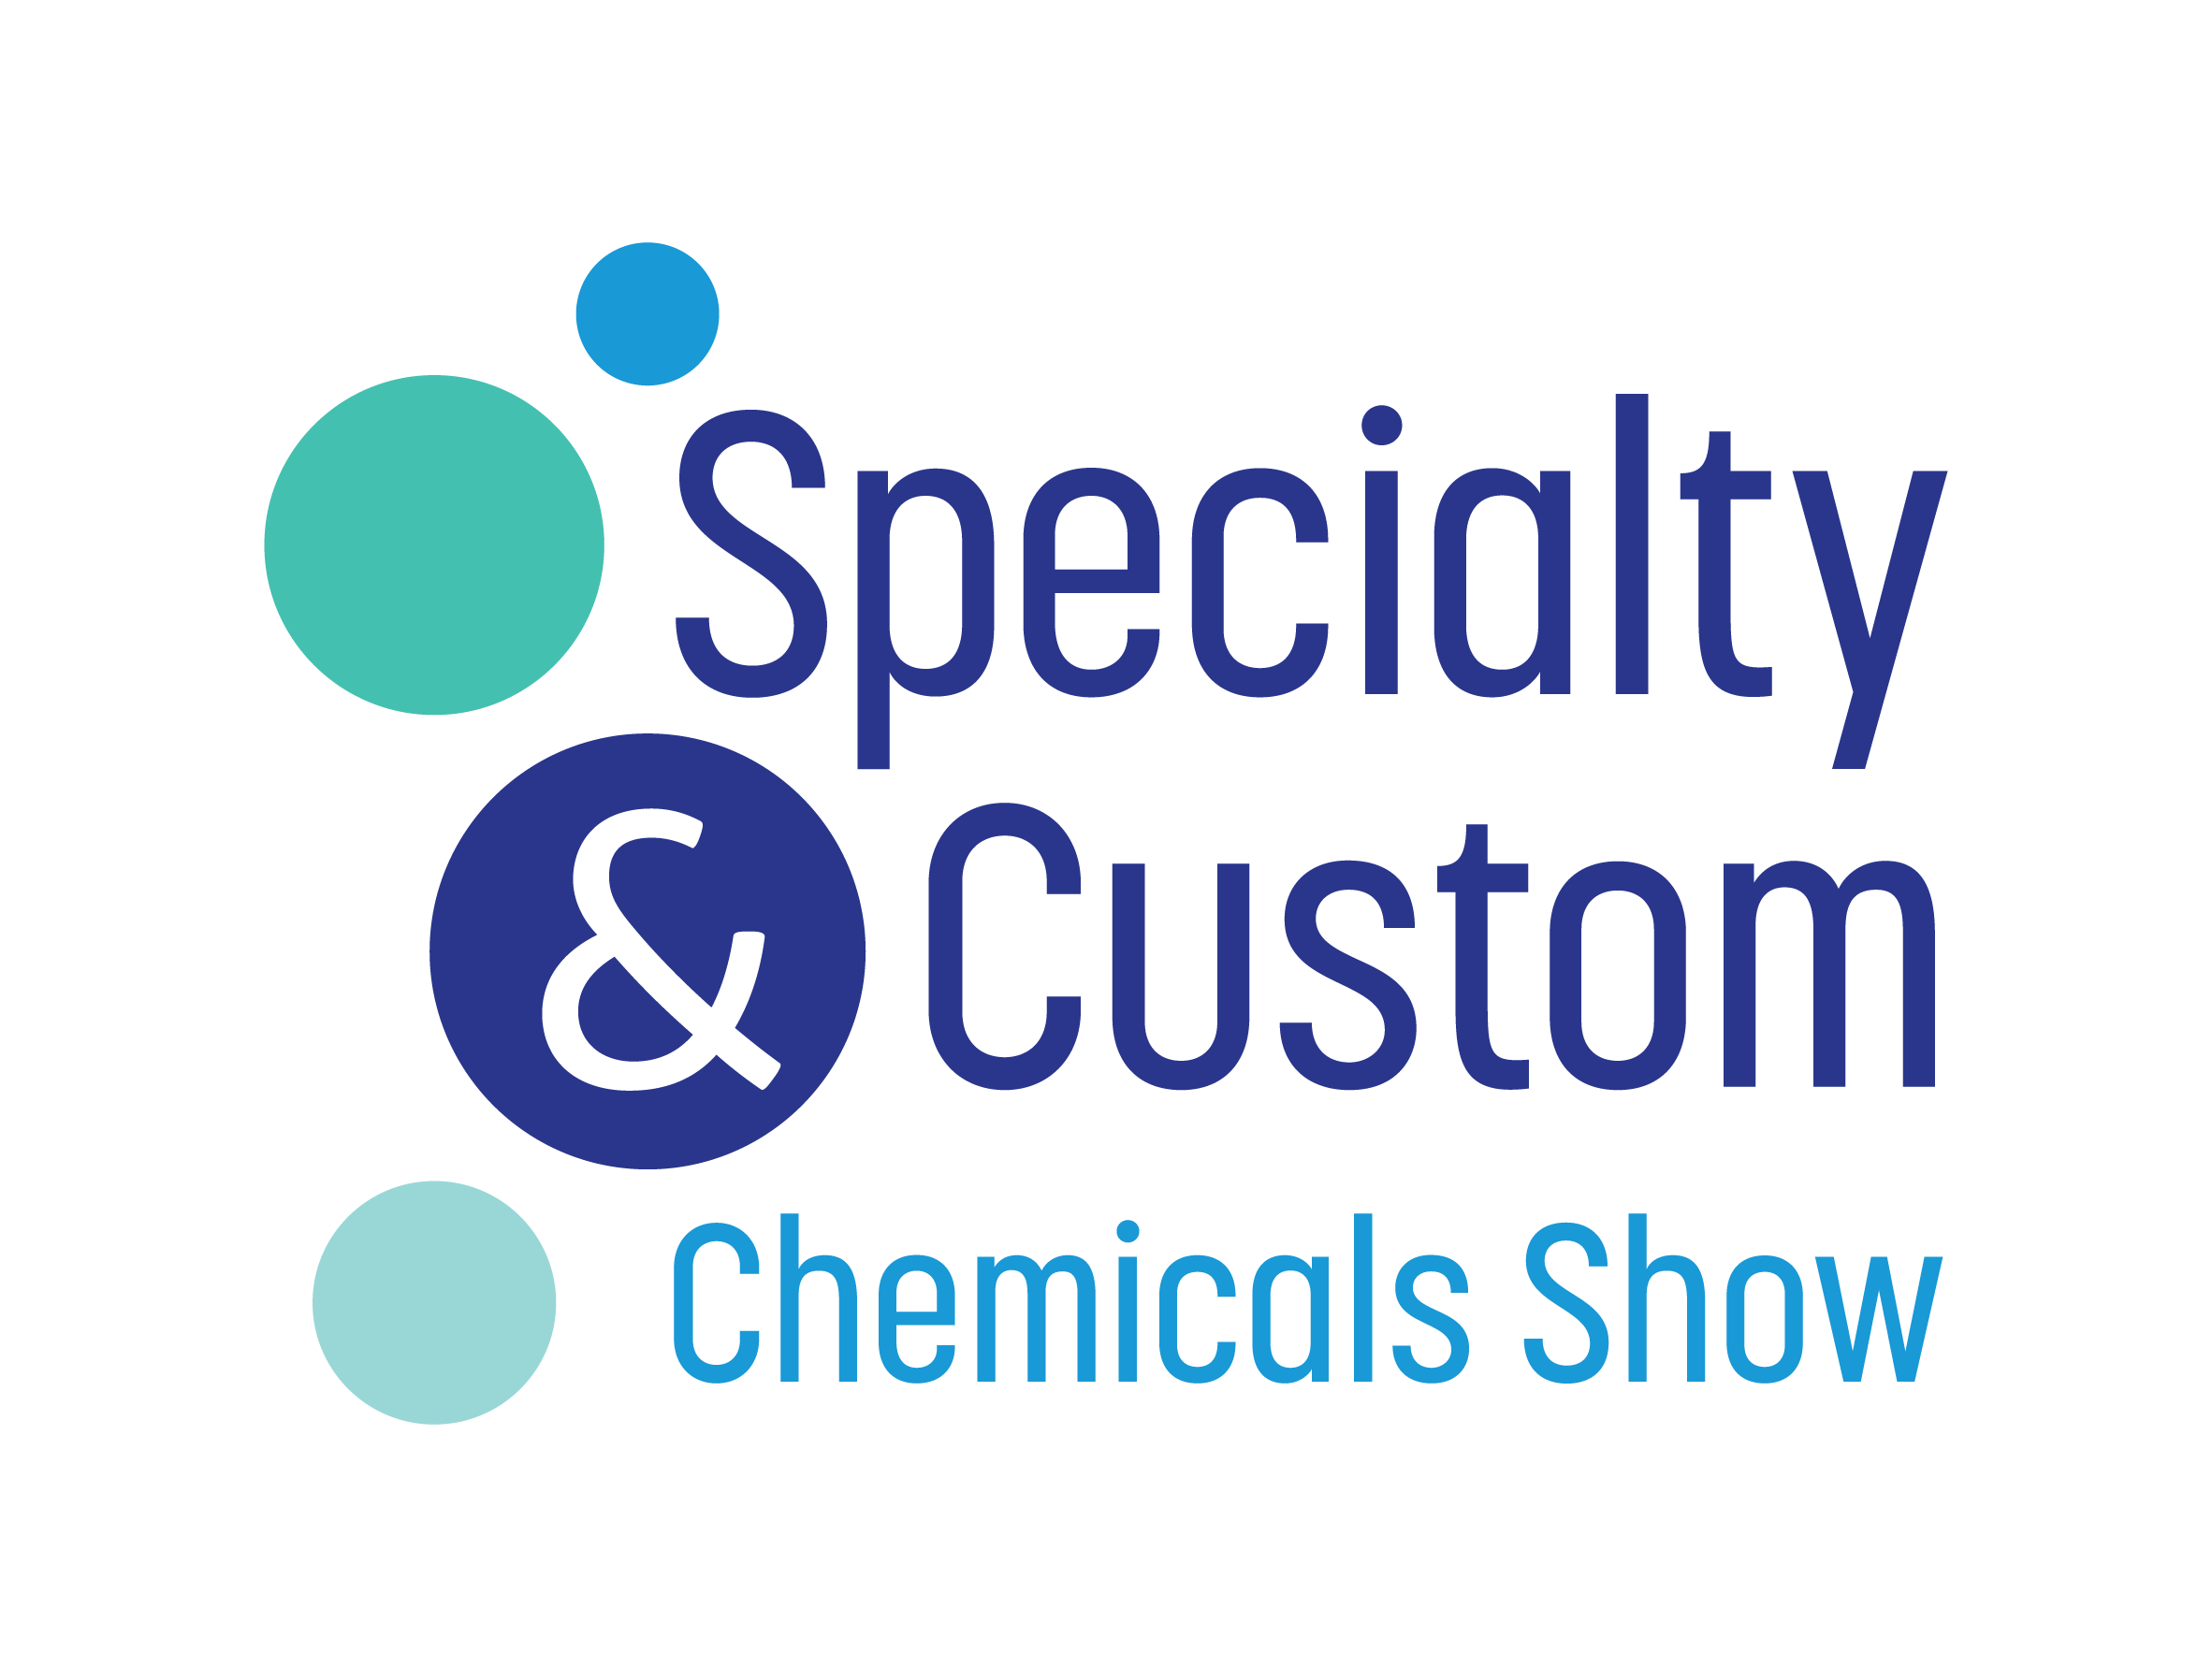 Specialty & Custom Chemicals Show